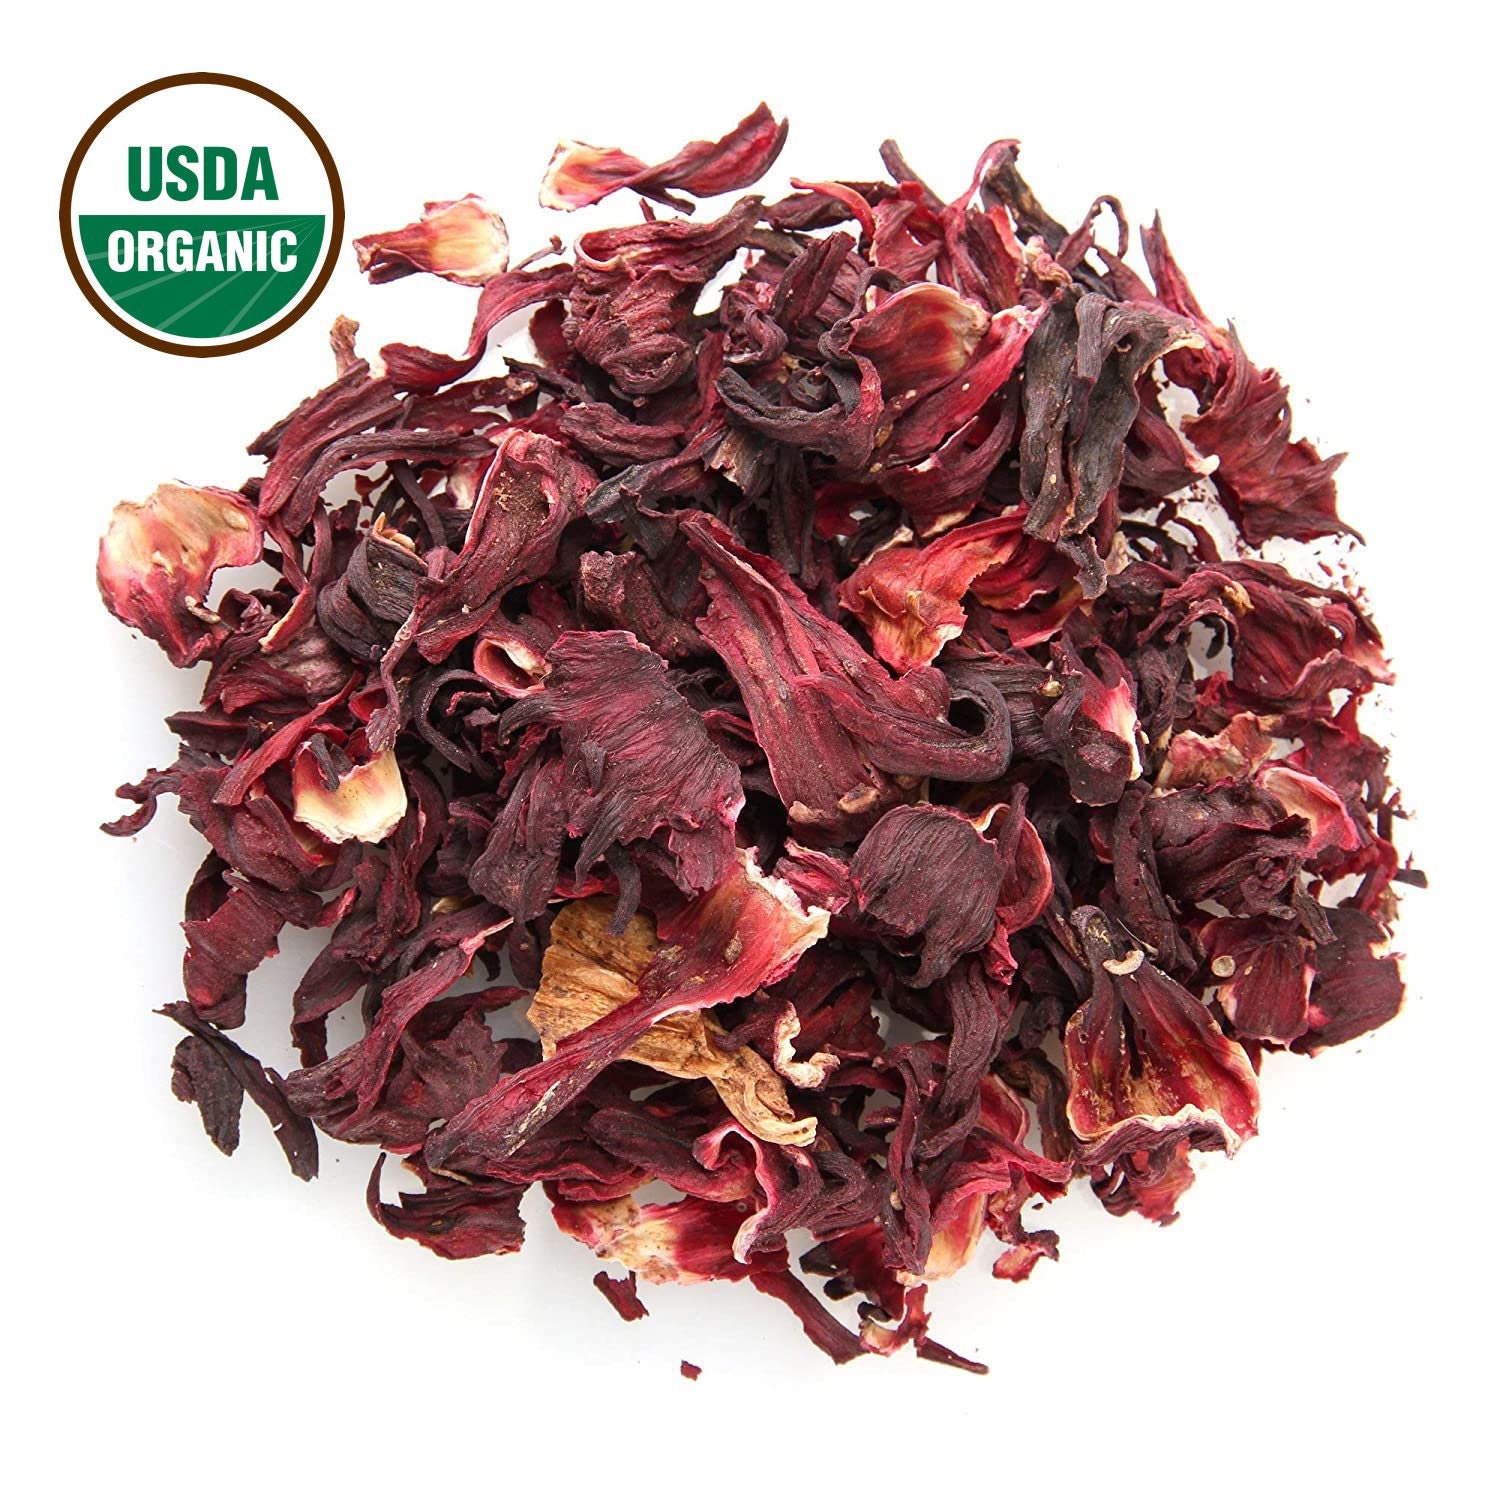 Ole Rico Dried Hibiscus Flowers 8 oz, Great for Hibiscus Tea, Jamaica Tea - 100% Natural Hibiscus Flowers, Cut and Sifted - Packaged in Resealable Bag